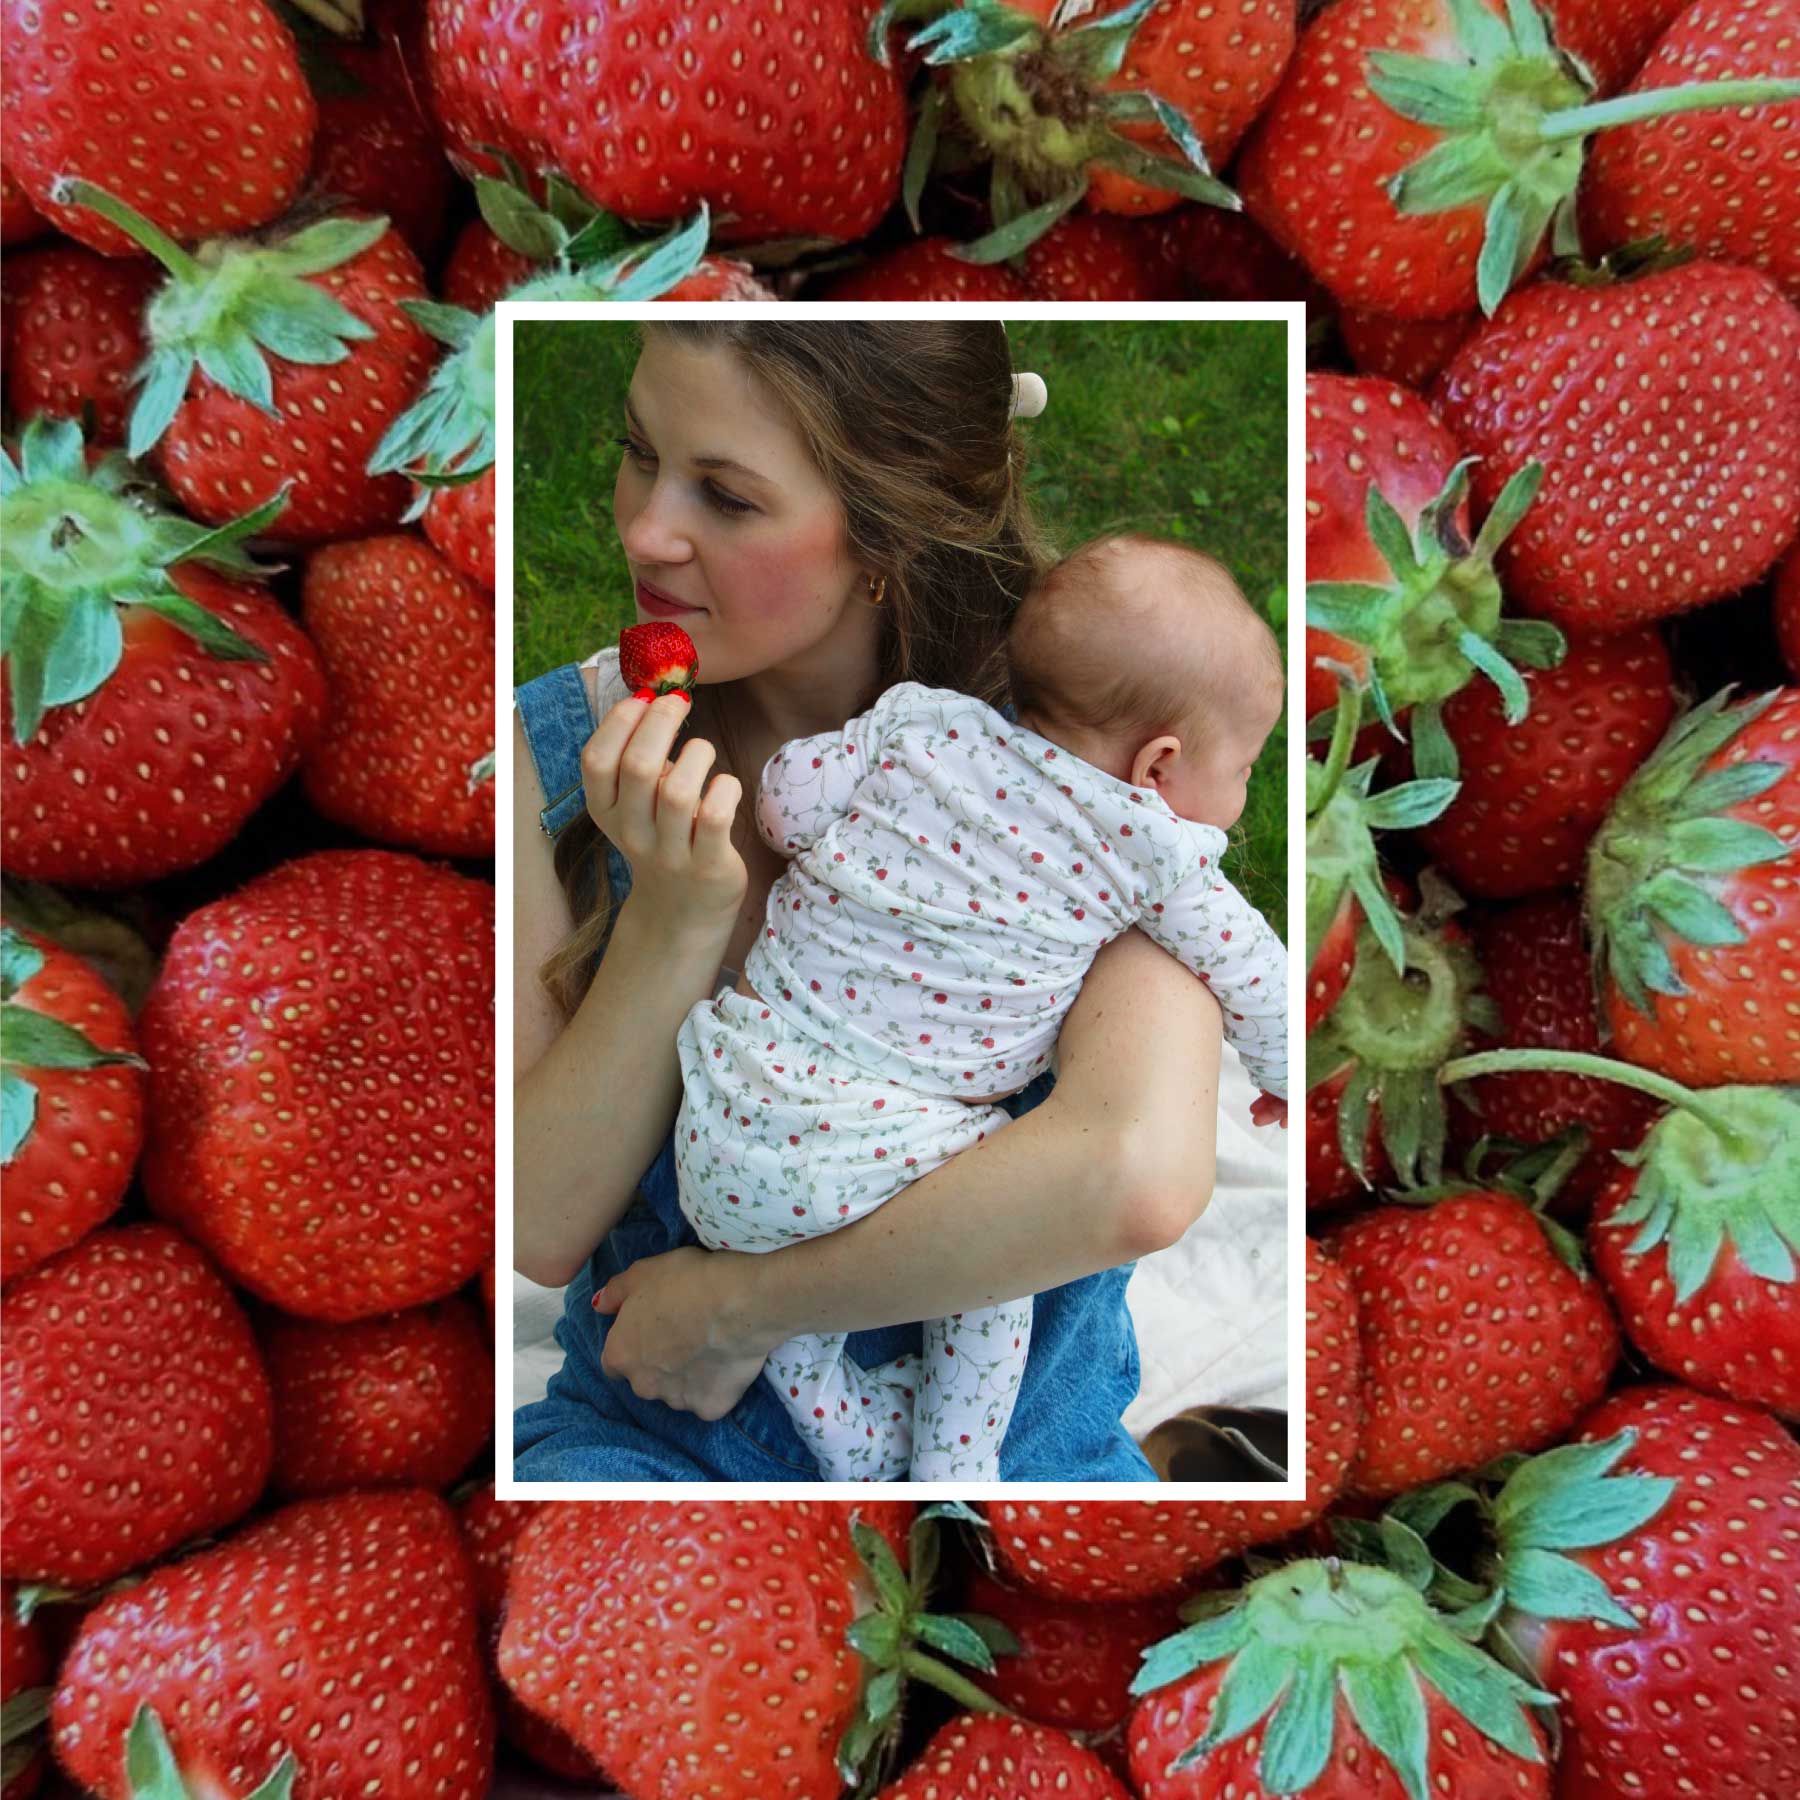 A Round-Up of Strawberry Recipes for the Postpartum Mama